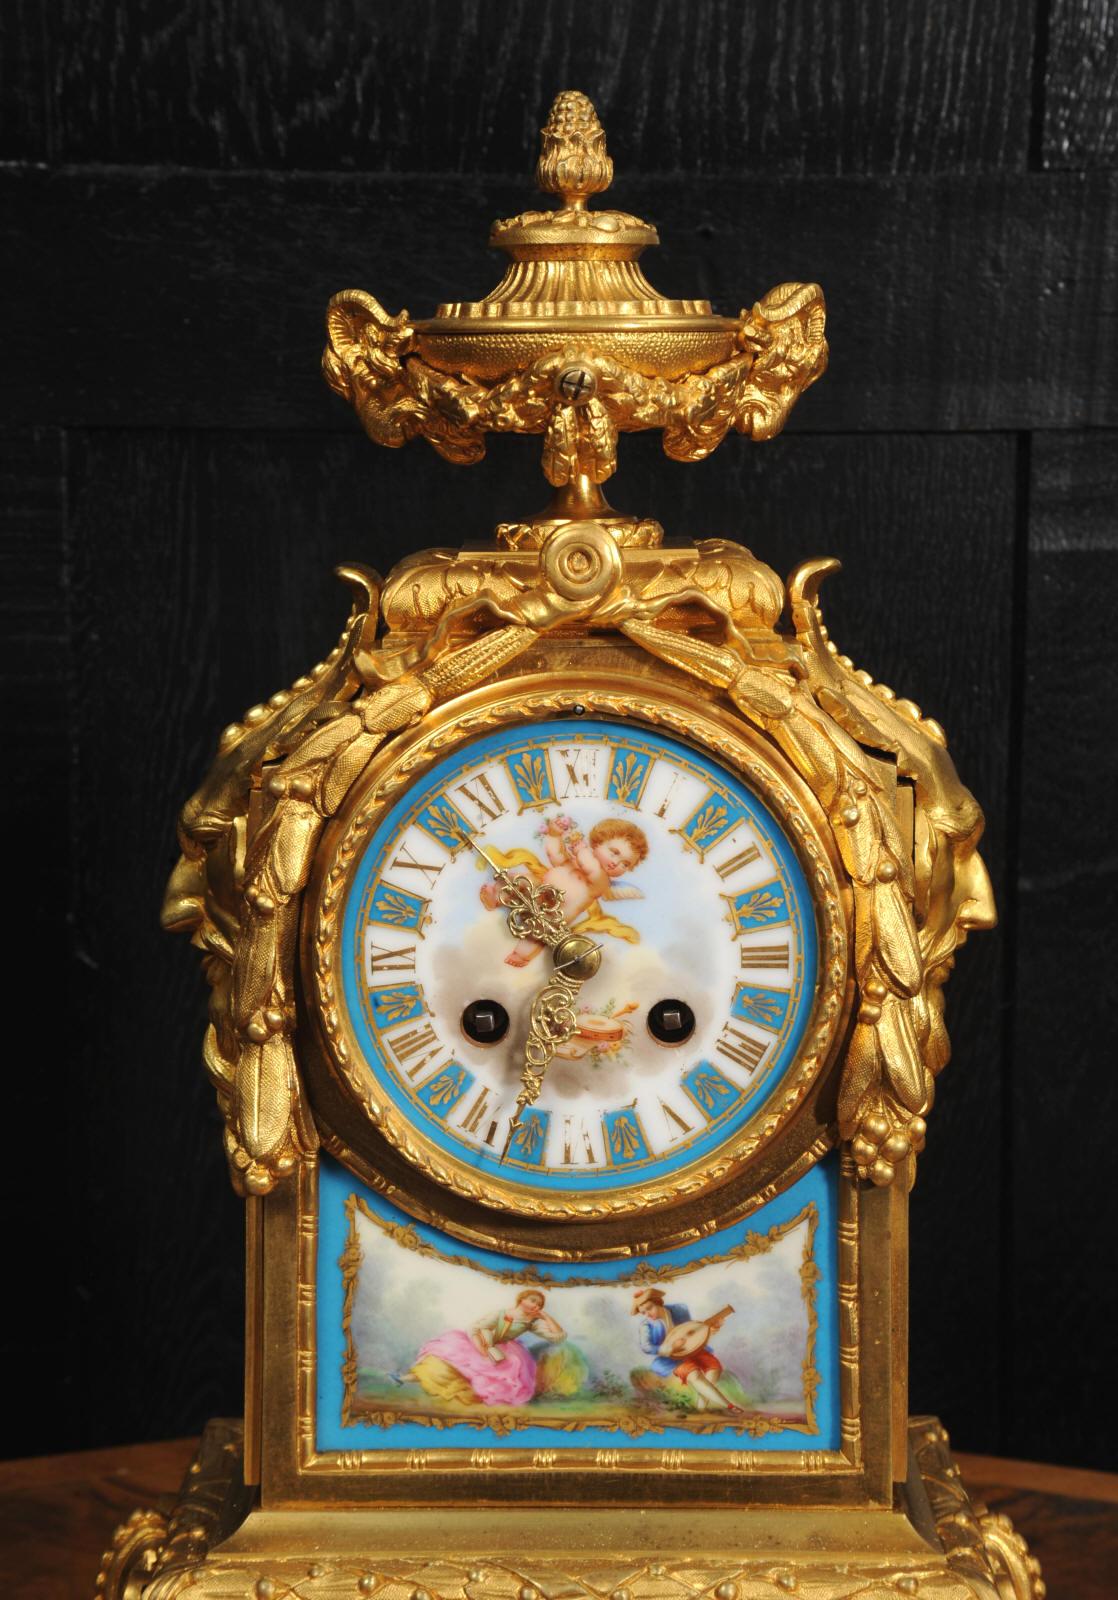 Early Ormolu and Sevres Porcelain Antique French Clock - Japy Fils Fully Working For Sale 8